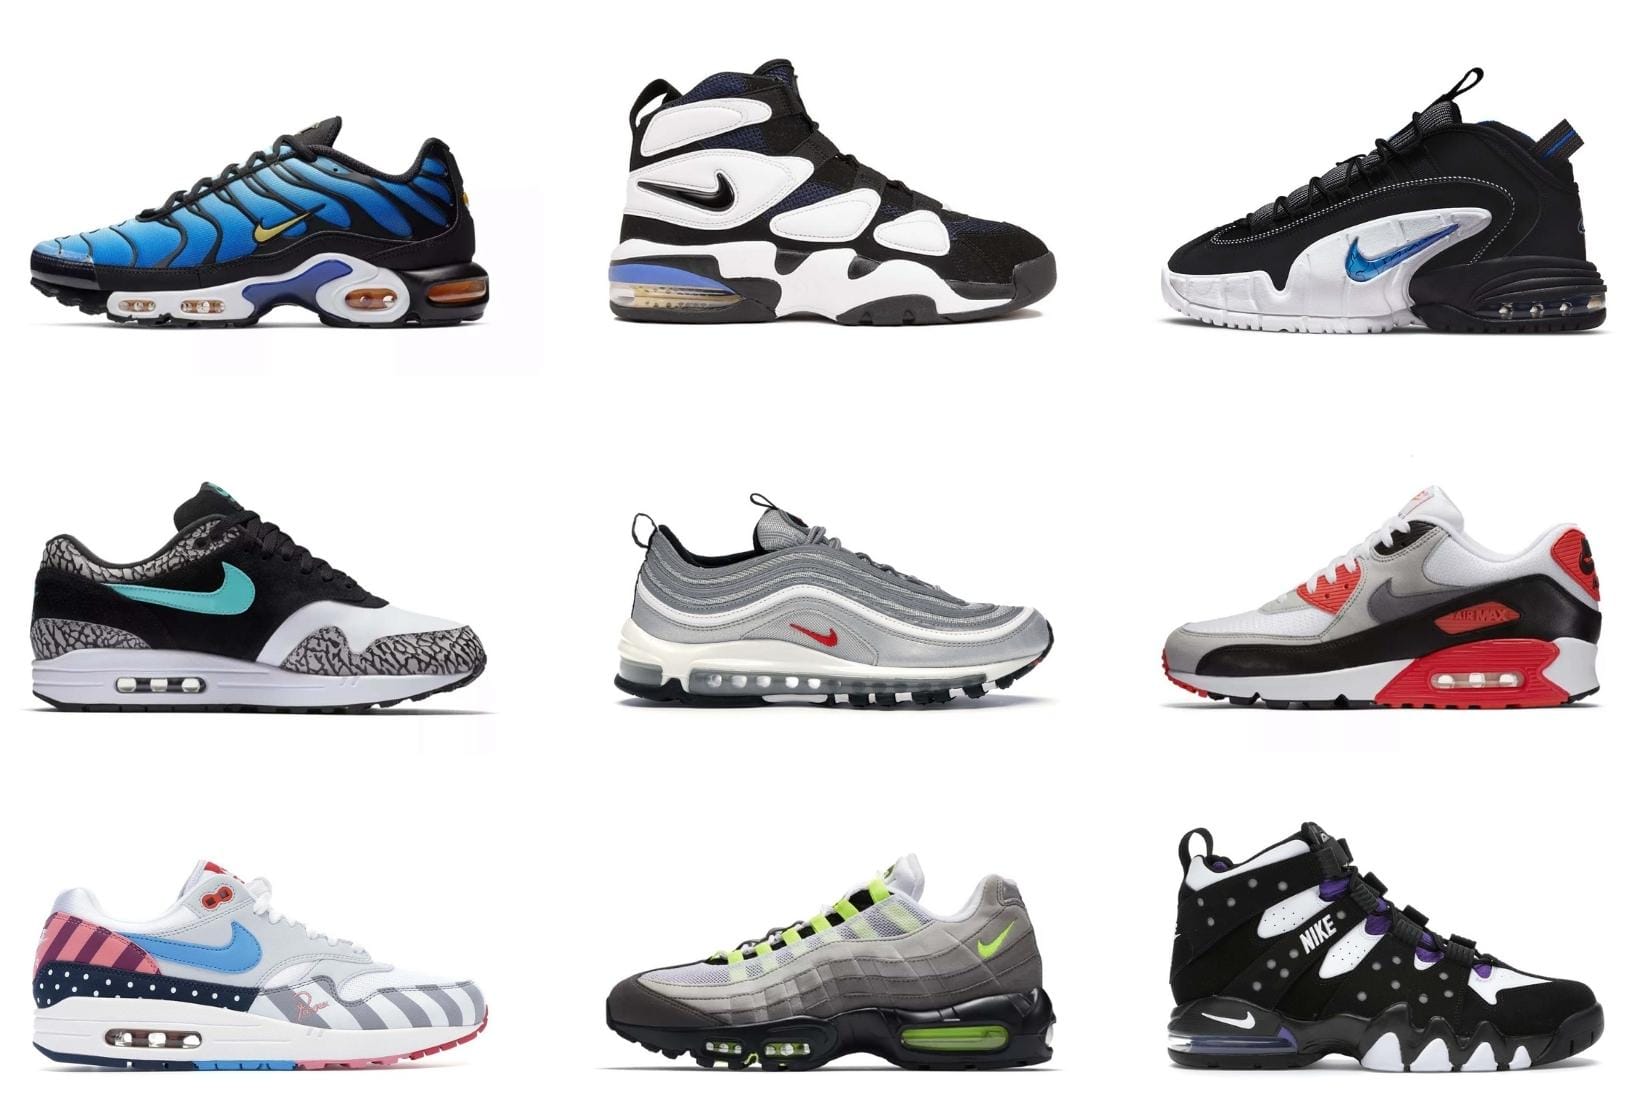 The complete guide to most popular sneaker collaborations (Nike x Supreme)  | eBay